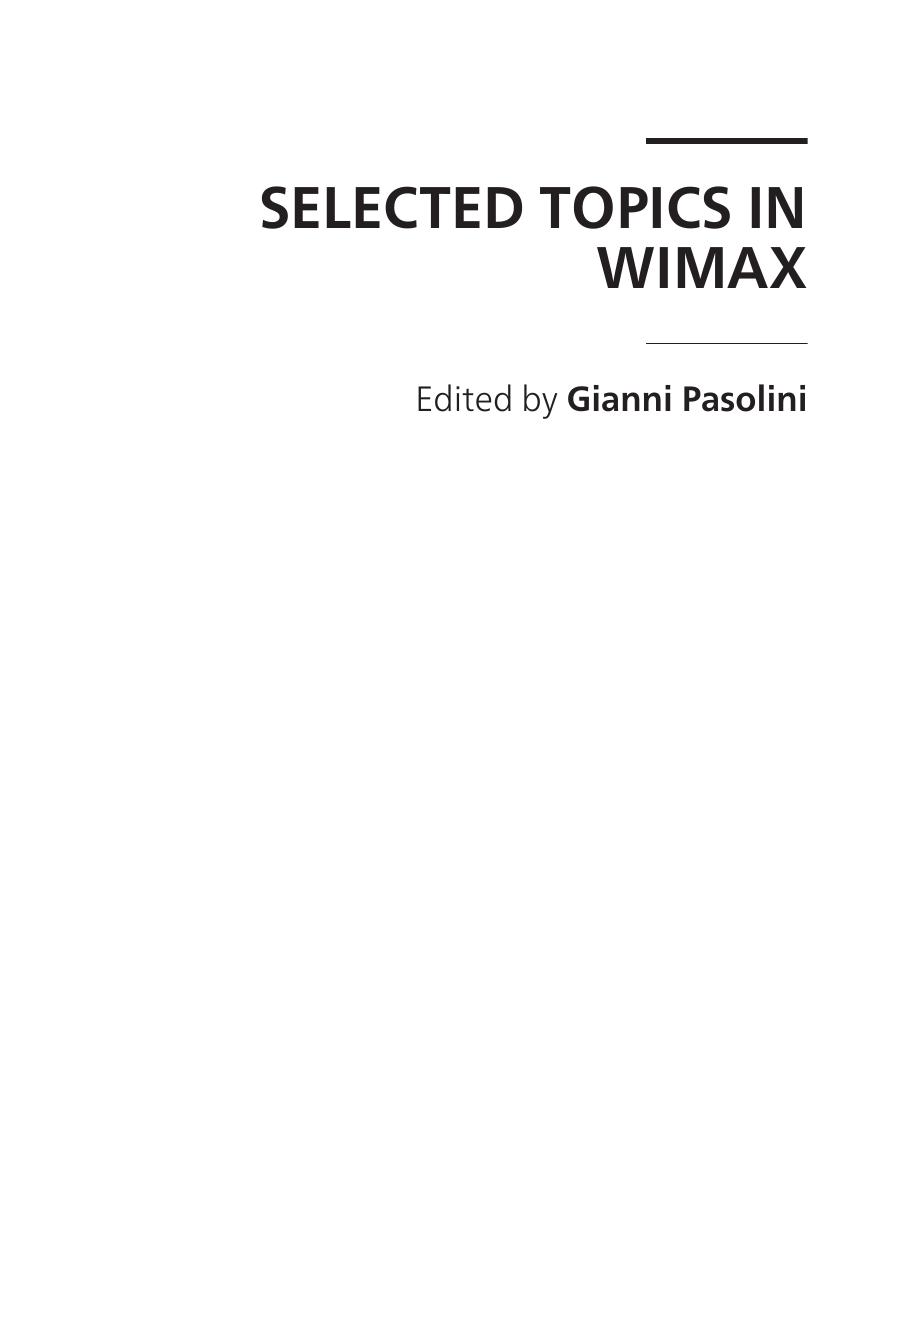 Selected Topics in WiMAX 2013.pdf